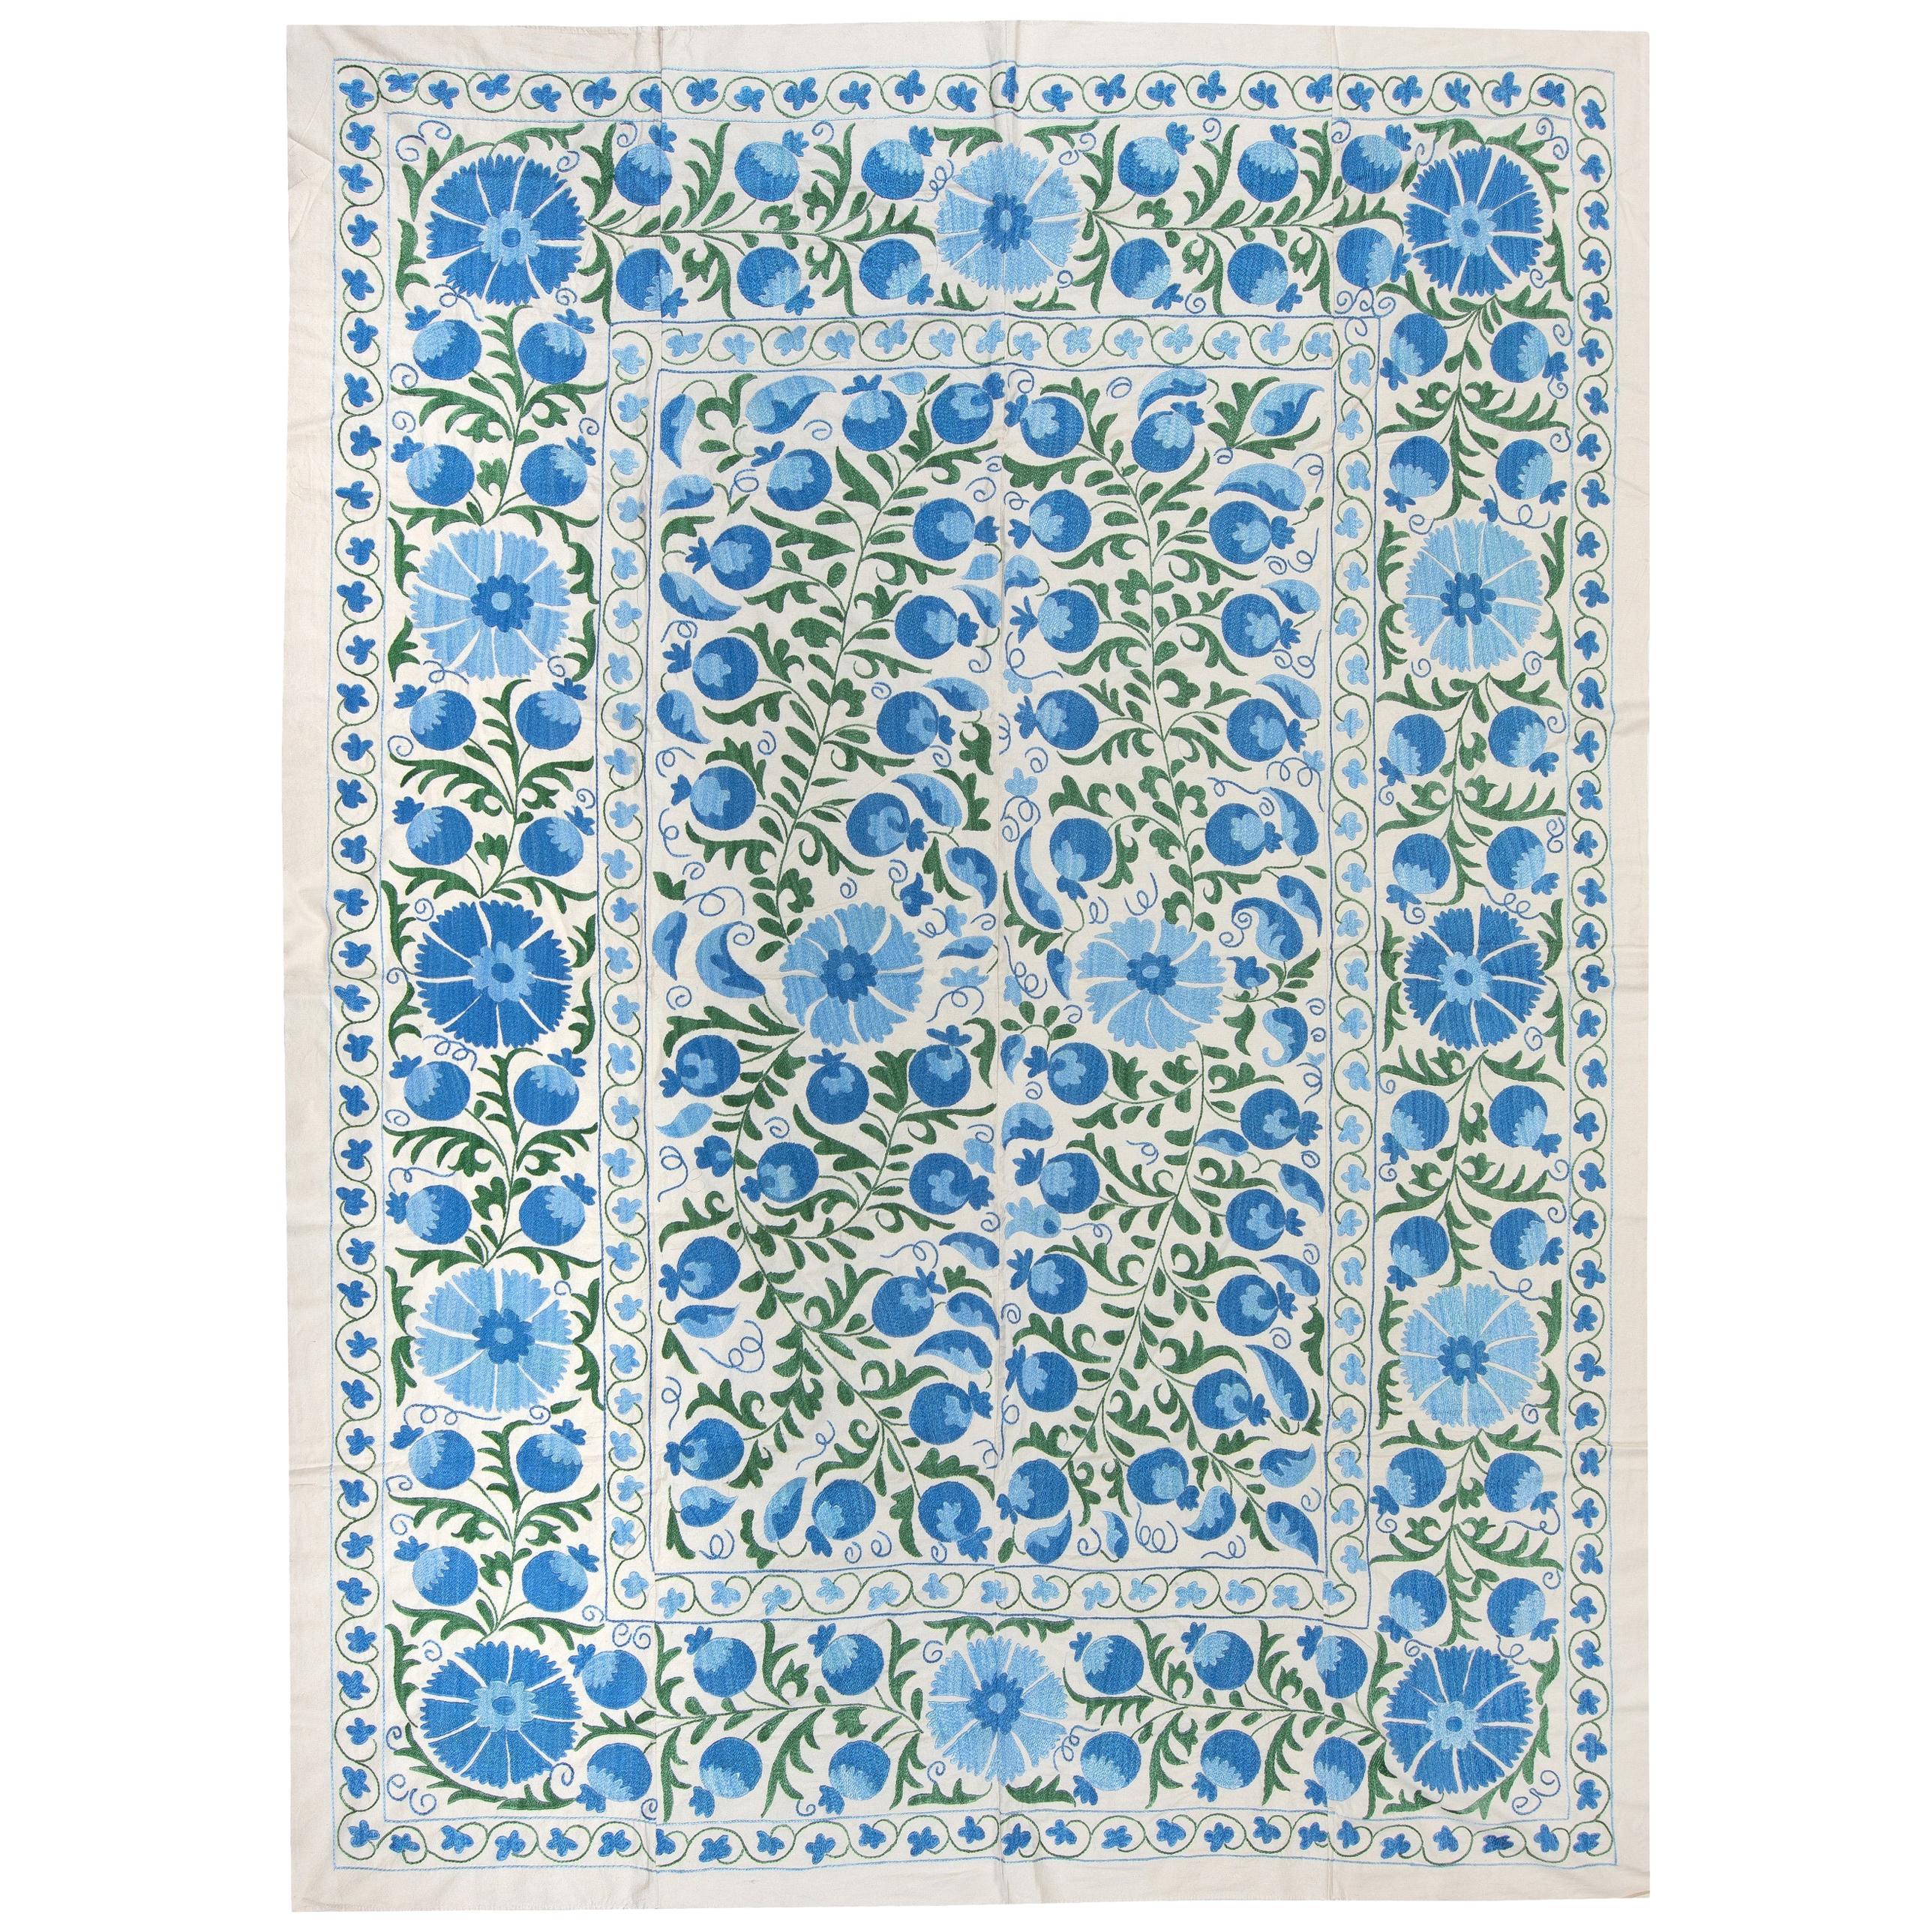 6.4x8.3 Ft Silk Embroidery Bedspread, Suzani Wall Hanging, Blue Uzbek Tapestry